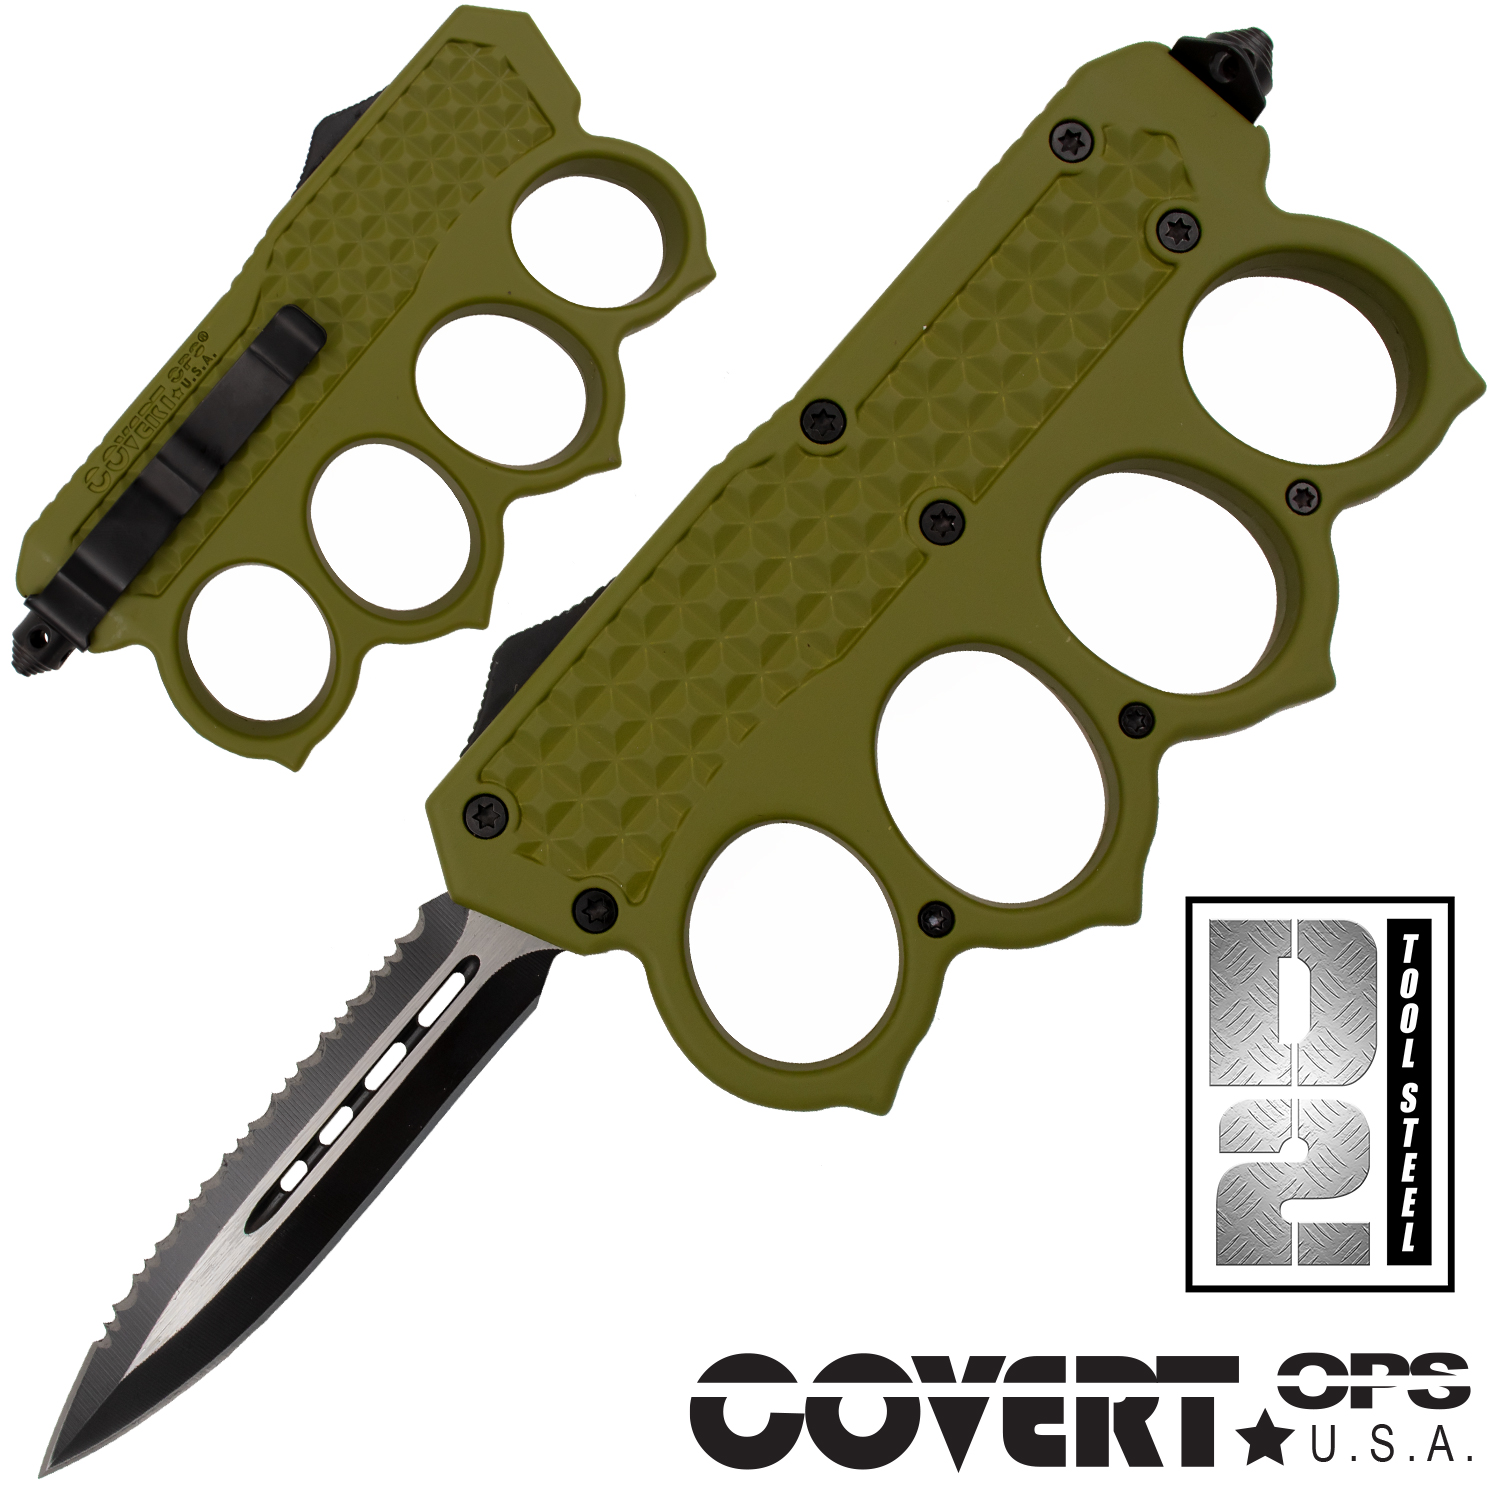 TA12 Automatic OTF Knuckle Knife with Tool and Carrying Case DE Serr (Green)